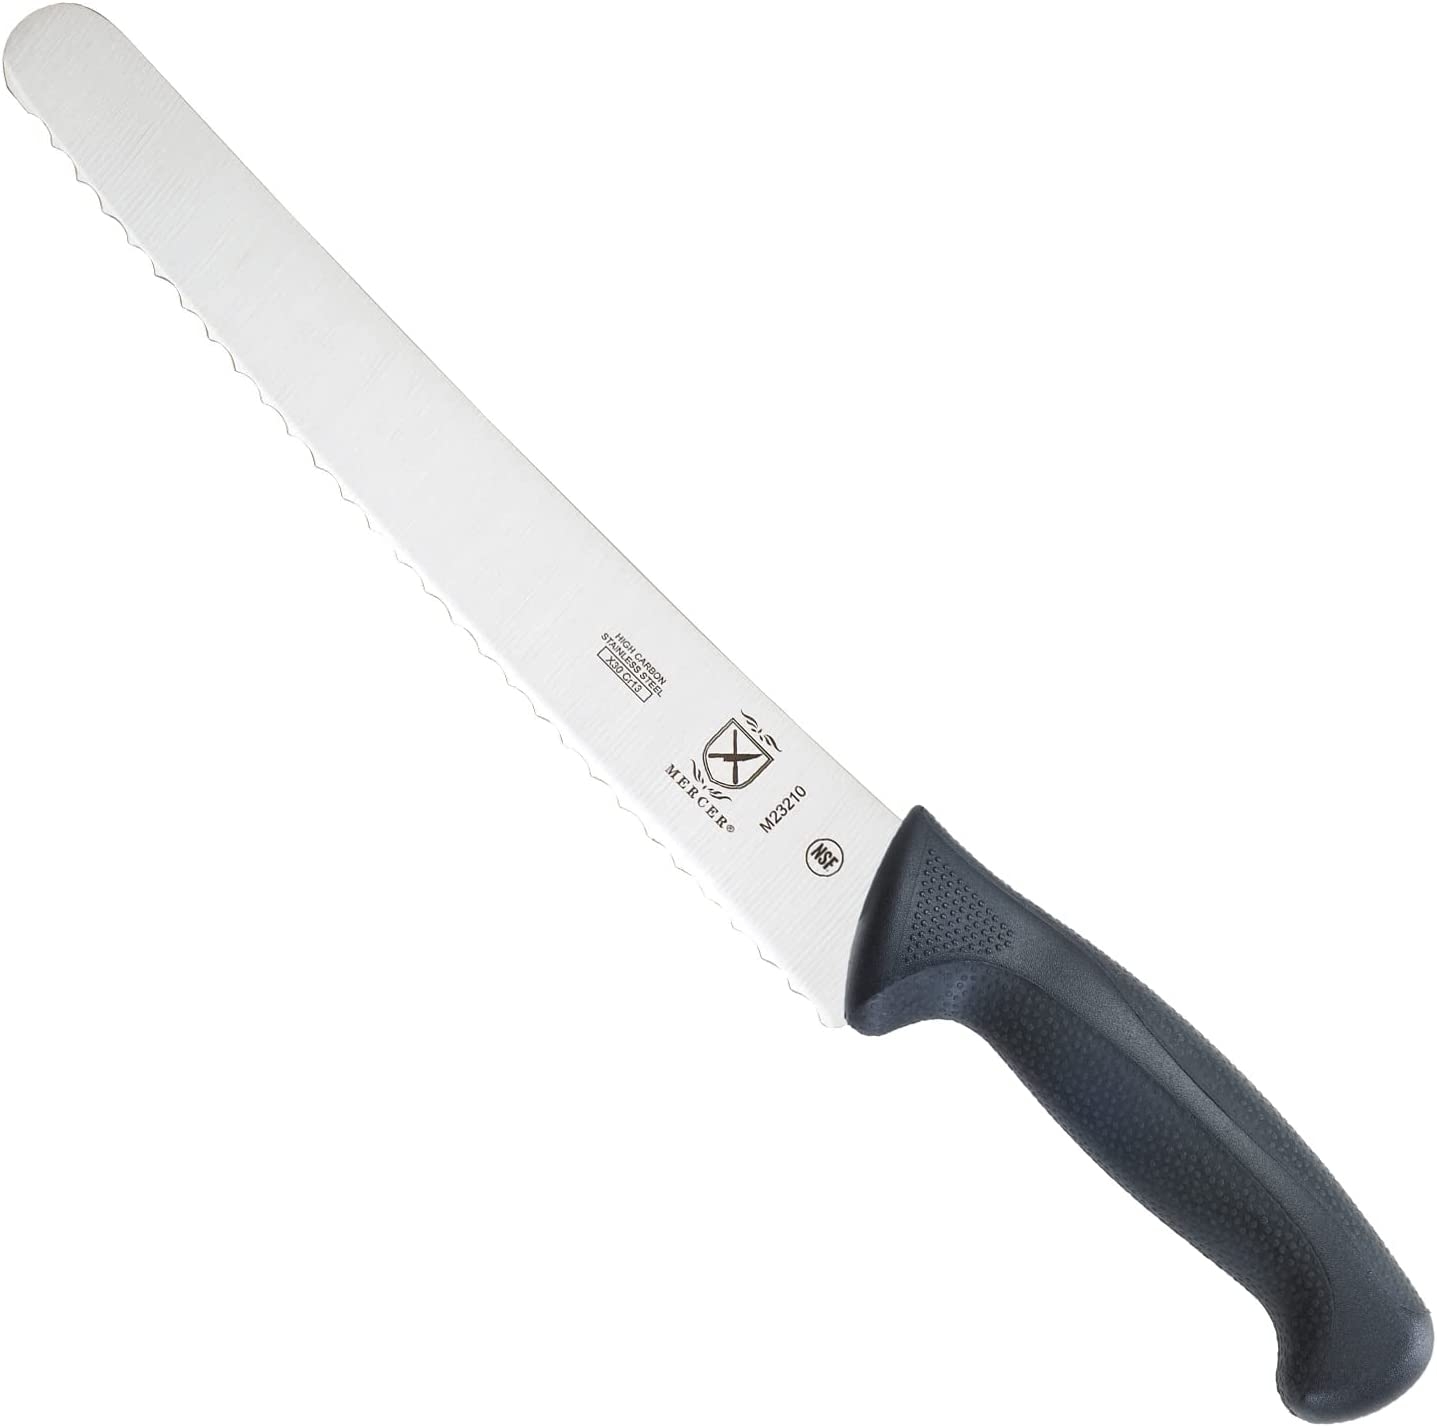 Mercer Culinary M23210 Millennia Black Handle, 10-Inch Wide Wavy Edge, Bread Knife Import To Shop ×Product customization